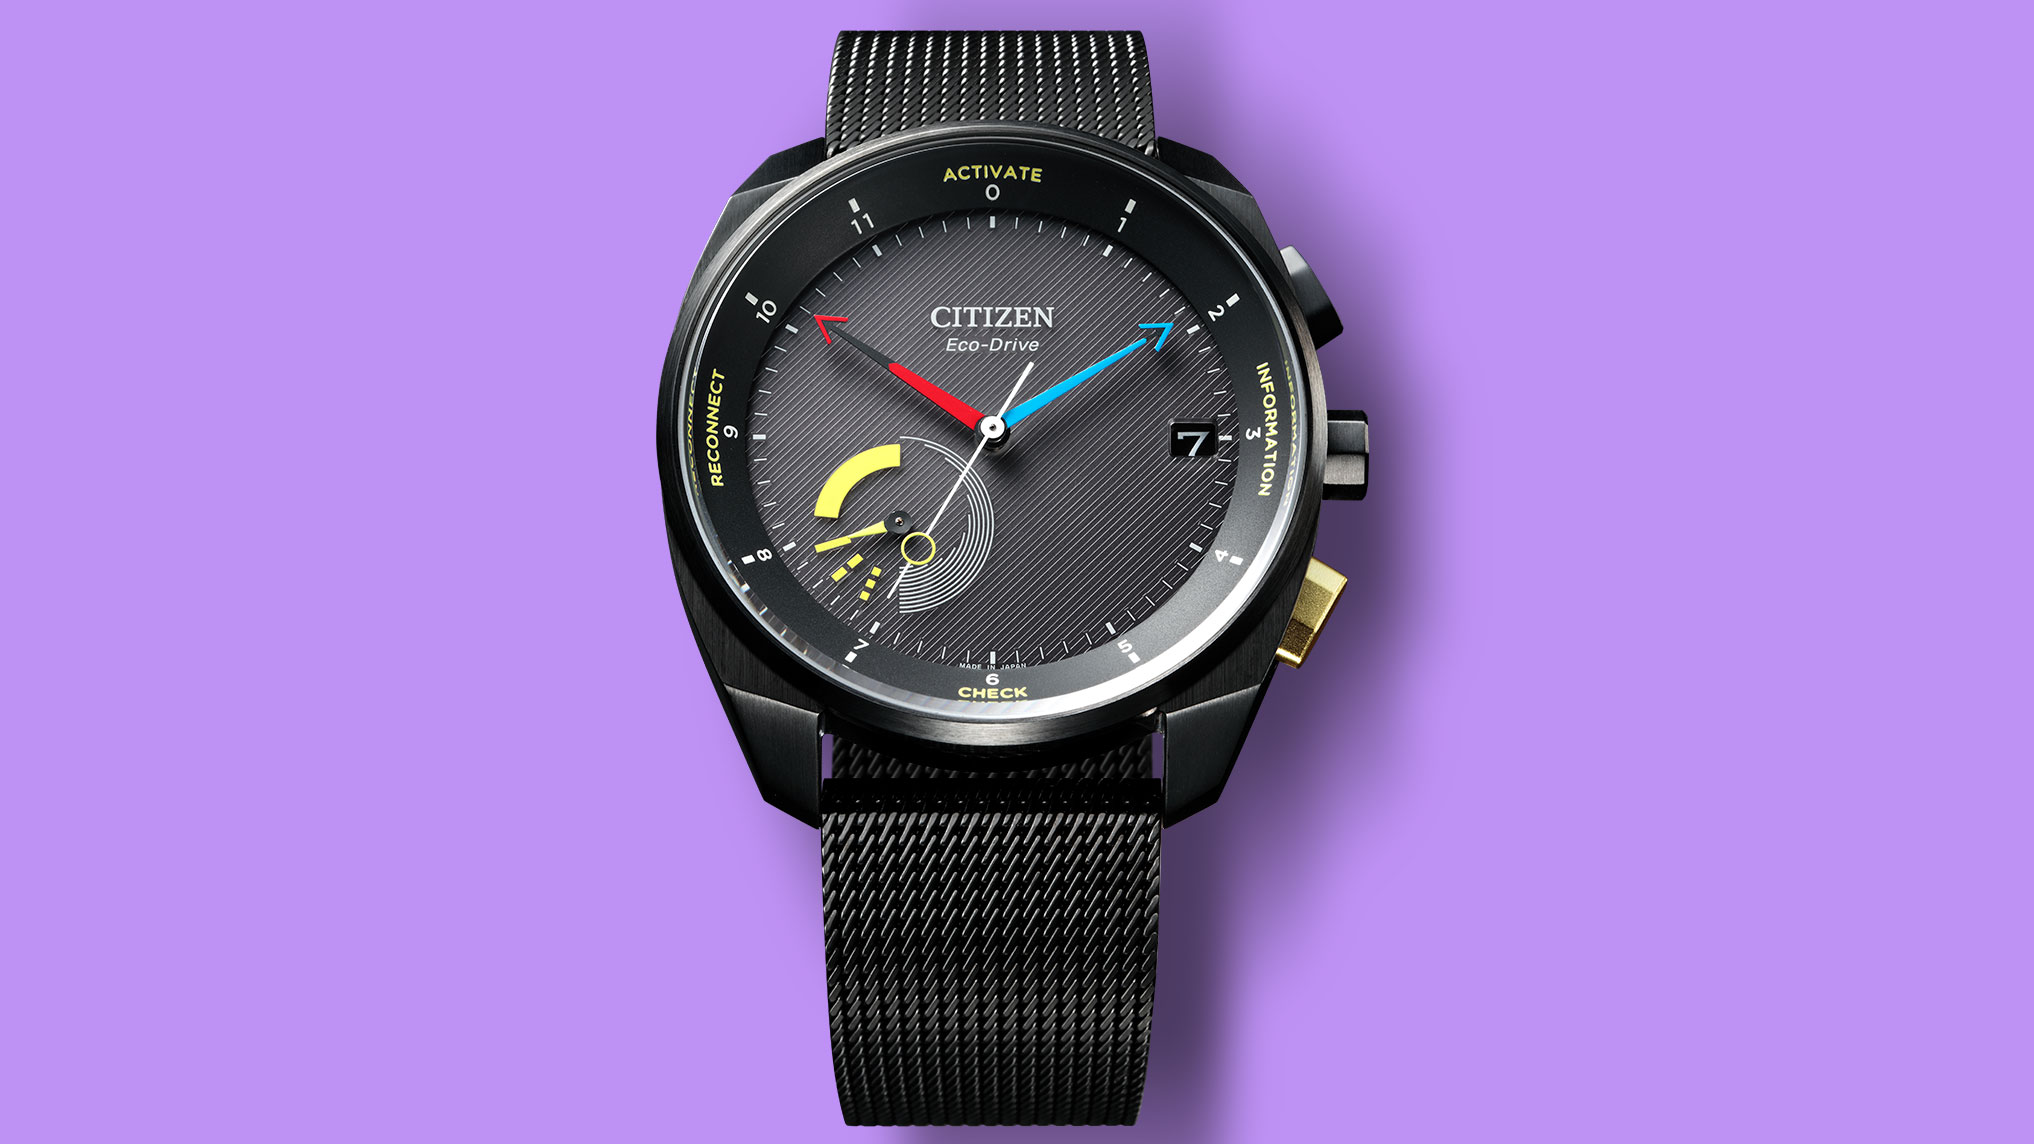 blad Jasje Geladen Citizen's latest hybrid smartwatch lets you order a taxi from a traditional  timepiece | TechRadar